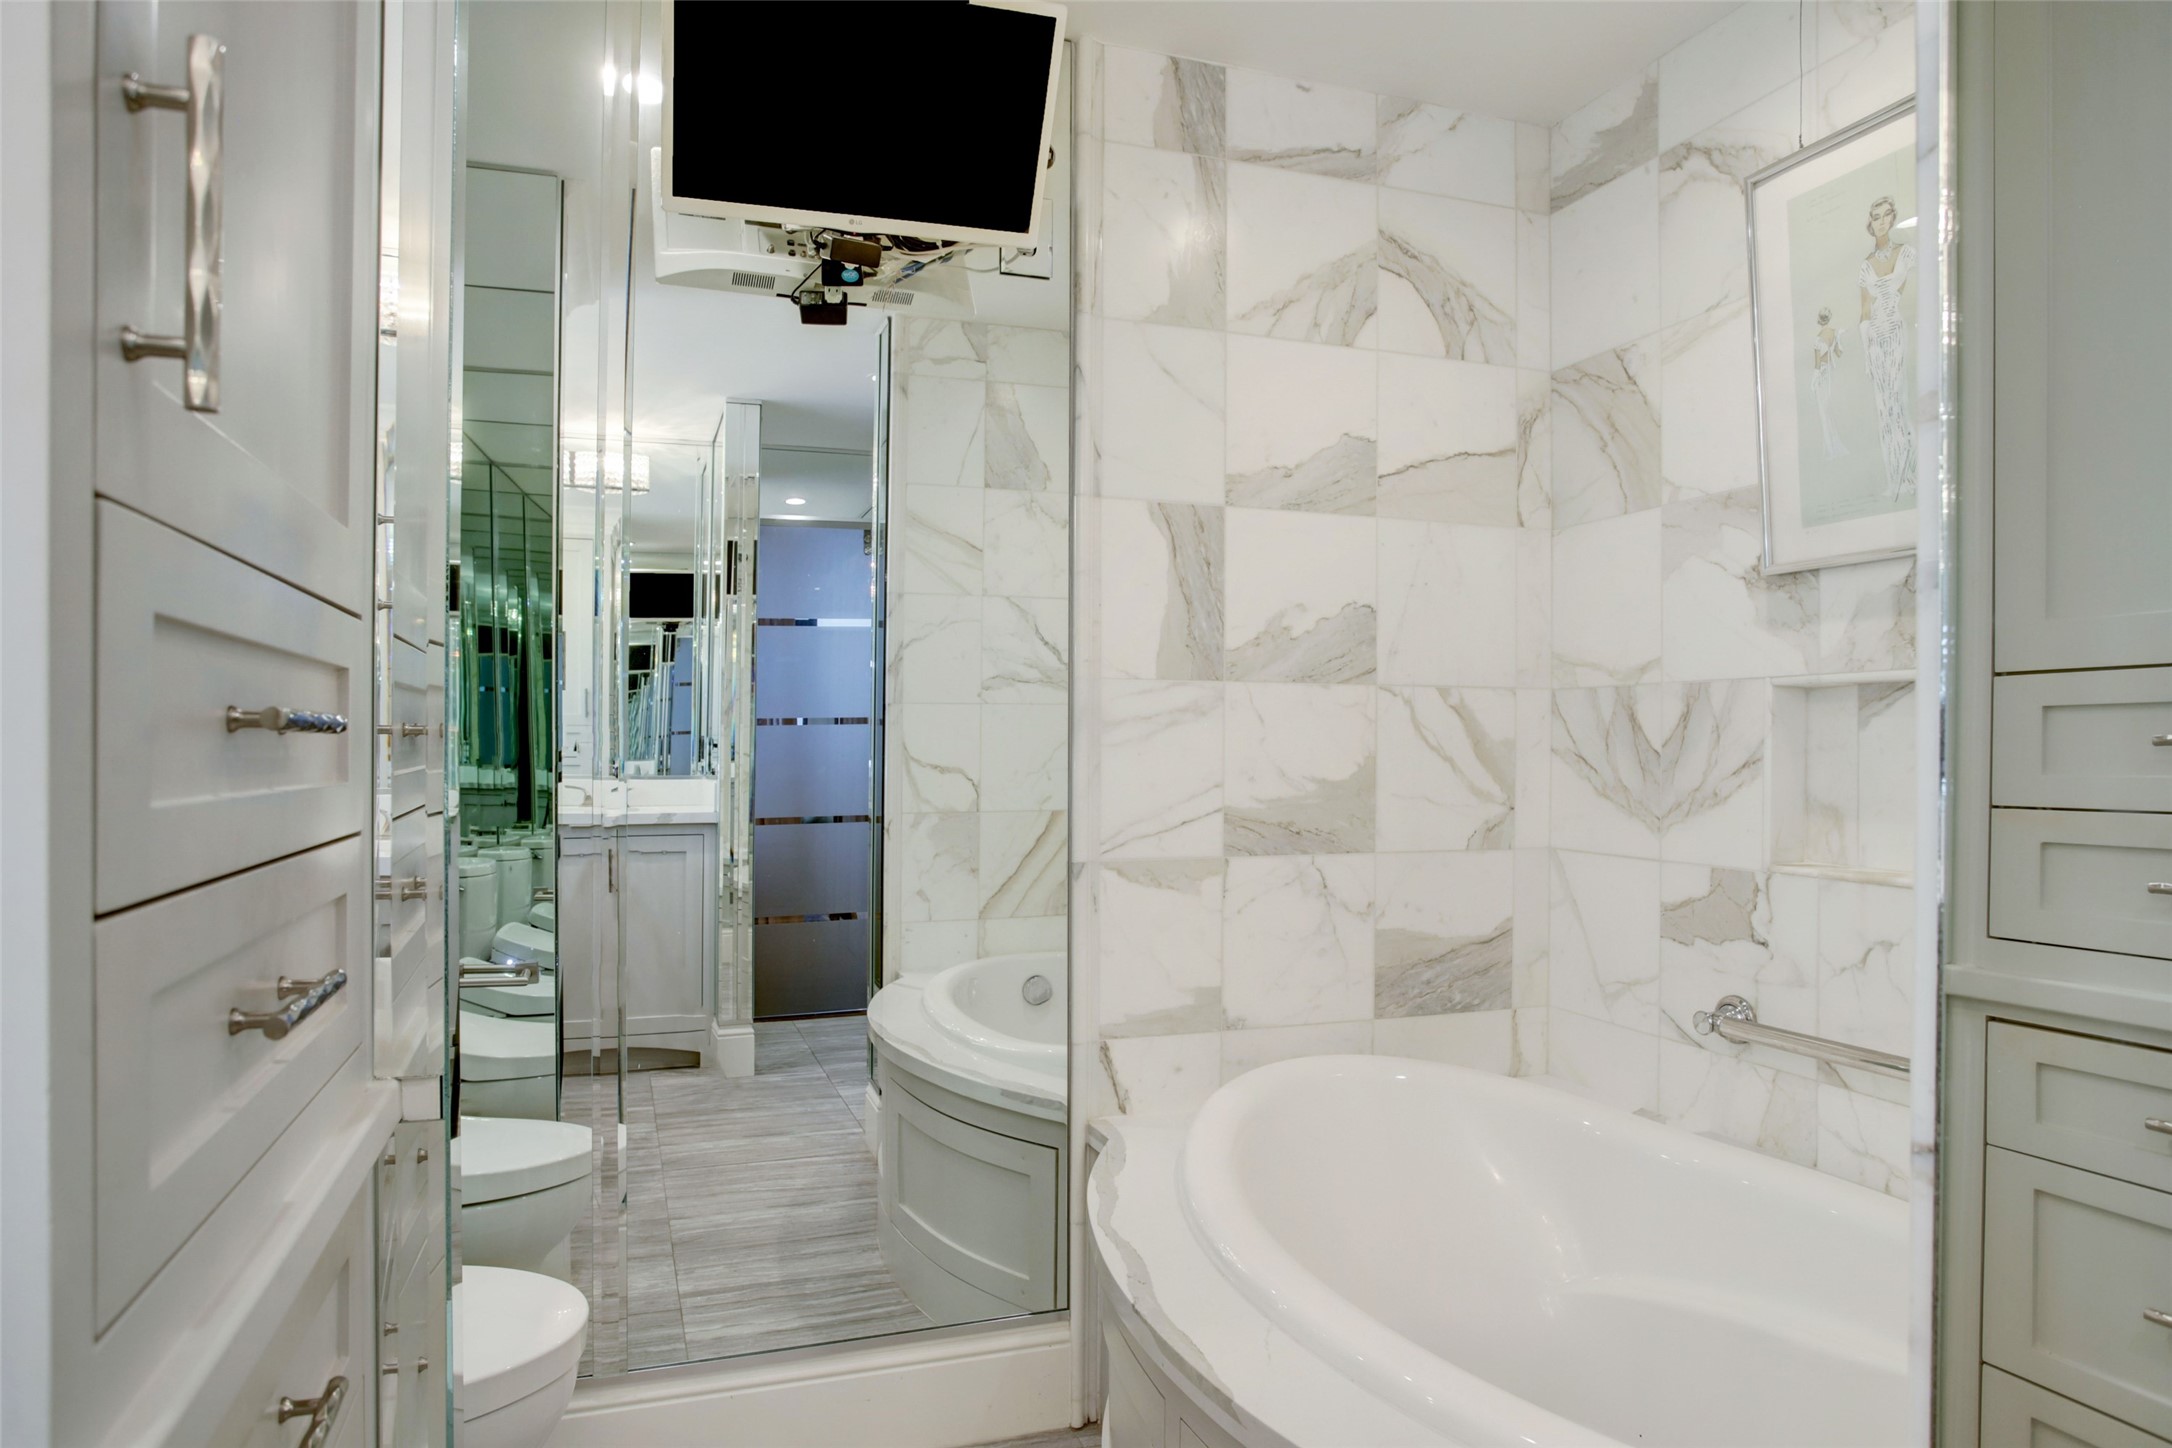 The primary ensuite is equipped with an airjet tub with marble tile surround, Toto Washlet toilet and more custom built-ins.